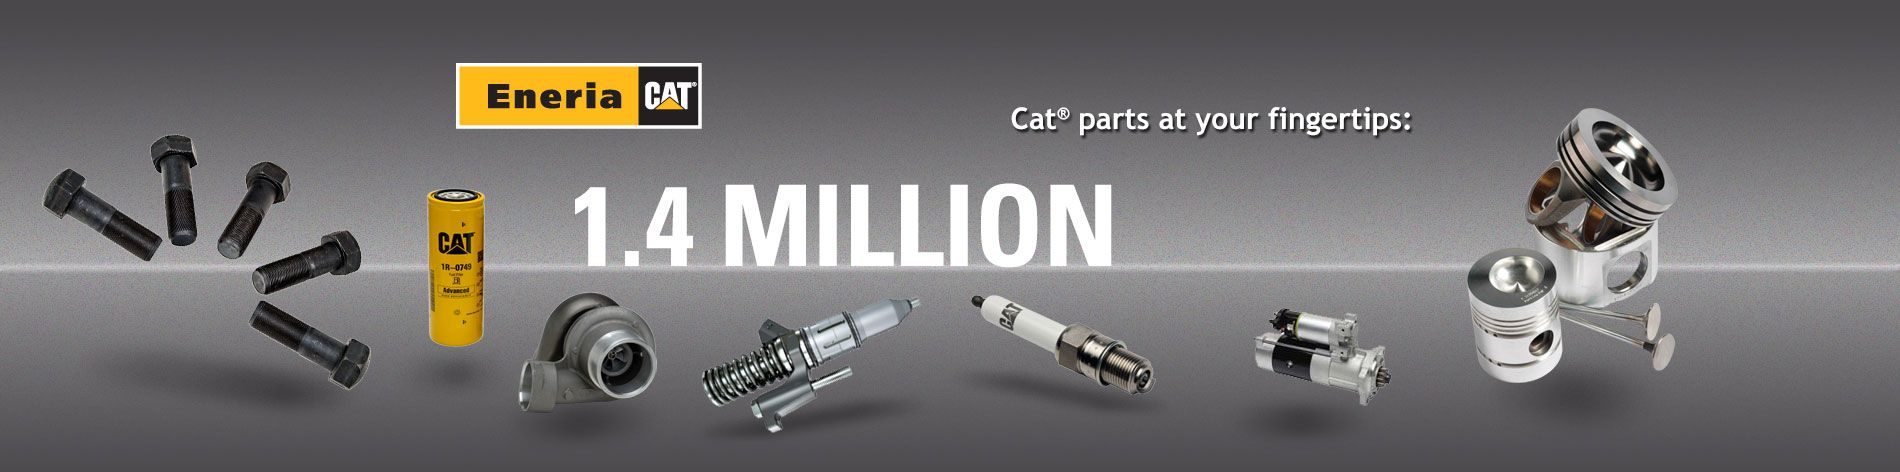 Caterpillar parts are built for durability, reliability, productivity, reuse and less environmental impact.